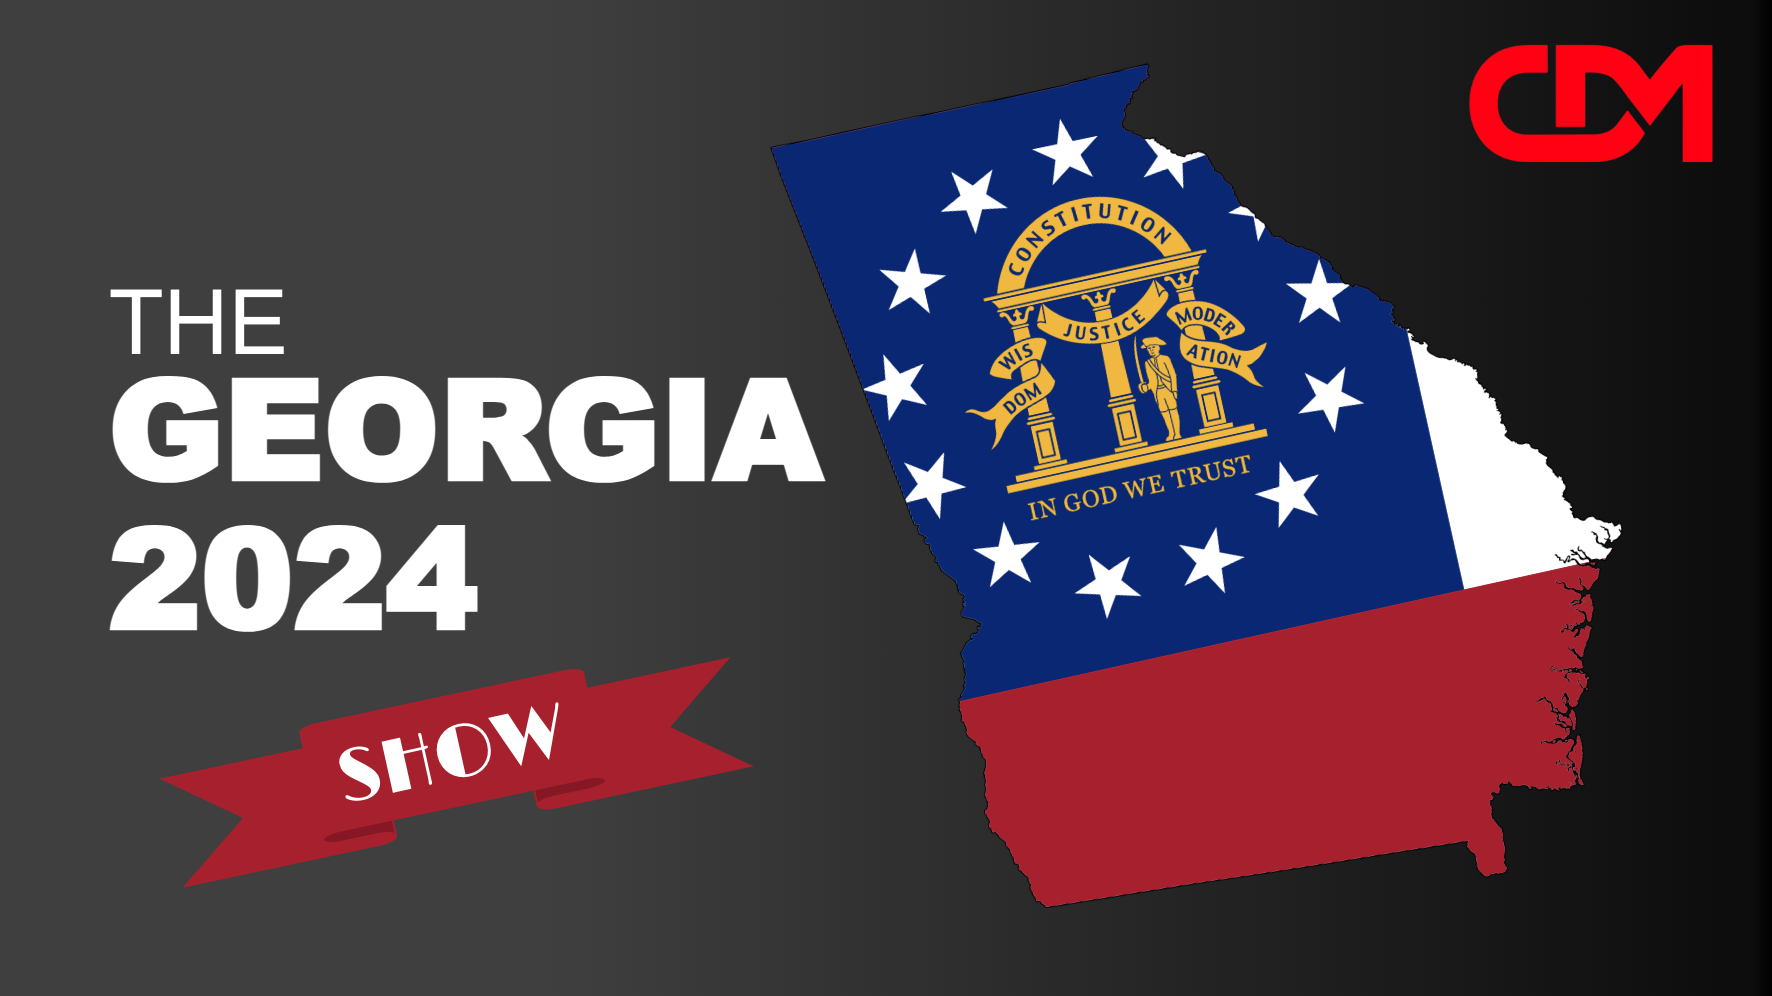 LIVE 7pm EST: The Georgia 2024 Show! With Mike Flynn